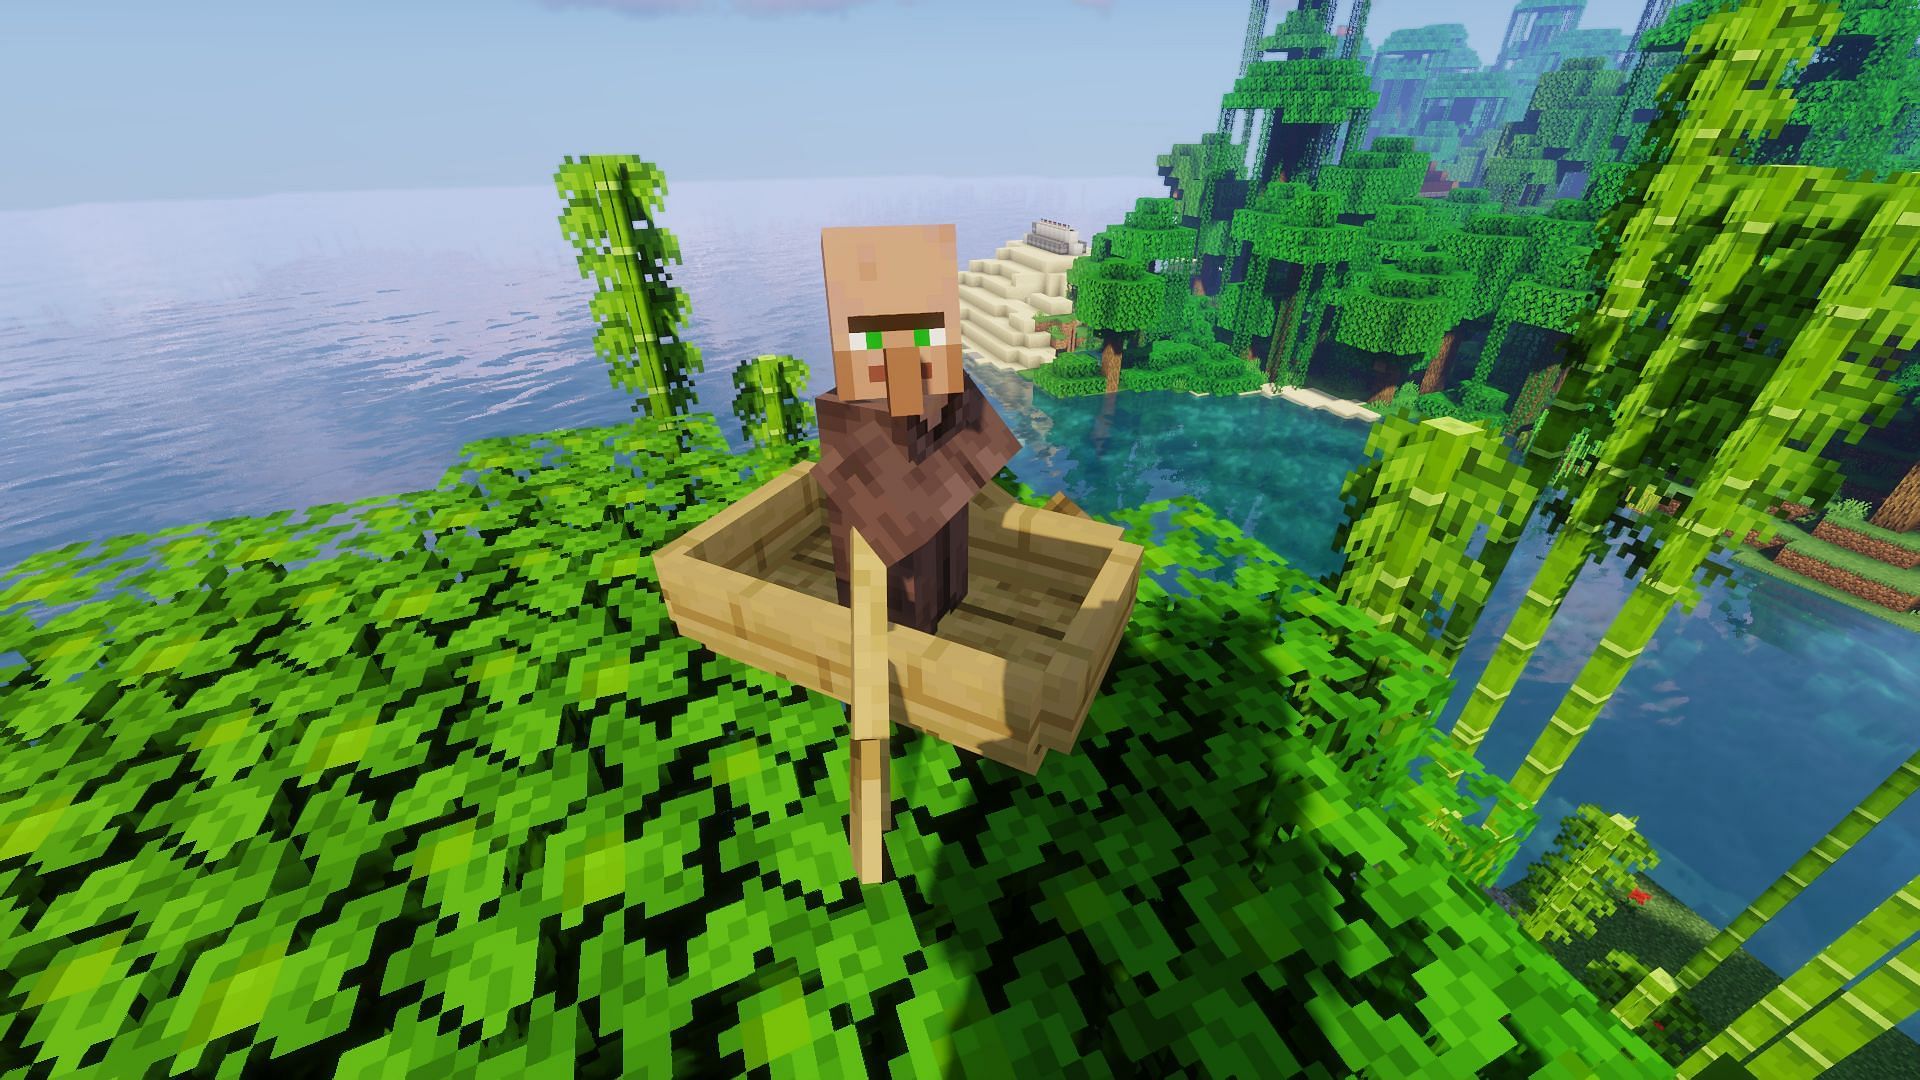 An example of a villager in a boat (Image via Minecraft)